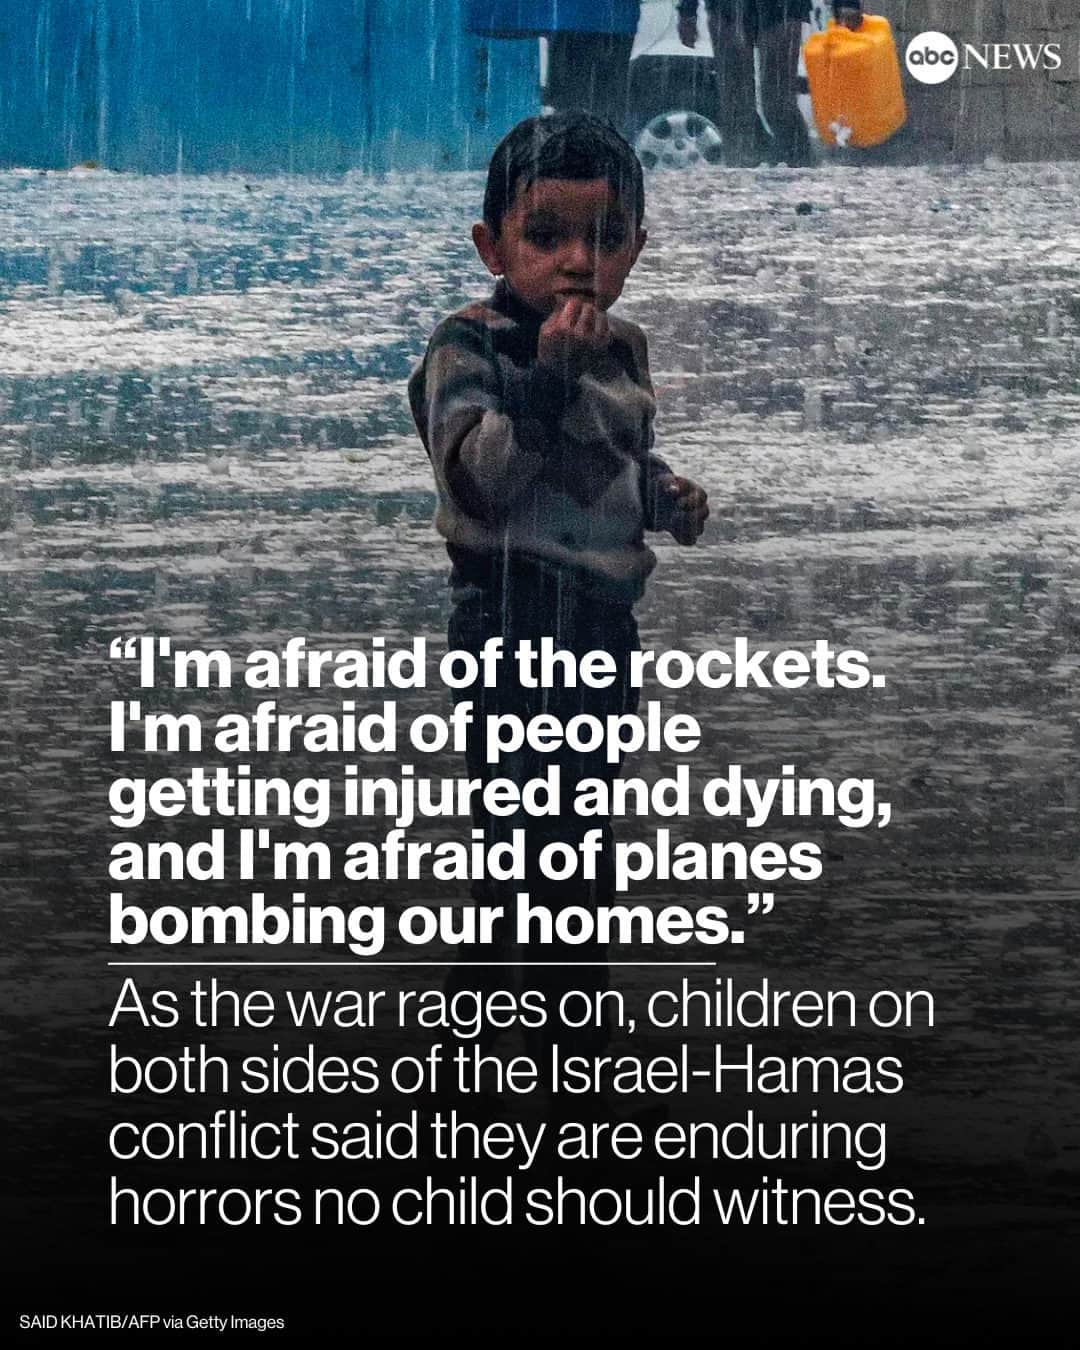 ABC Newsのインスタグラム：「As the war between Israeli forces and the Hamas terror group rages on, children caught in the crossfire on both sides of the conflict are enduring unfathomable horrors.  From witnessing their parents slain and having loved ones kidnapped to living in constant fear of being hit by a missile, some of the children in the war zone told @ABCNews they have witnessed a living nightmare.  Read more at the link in bio.」